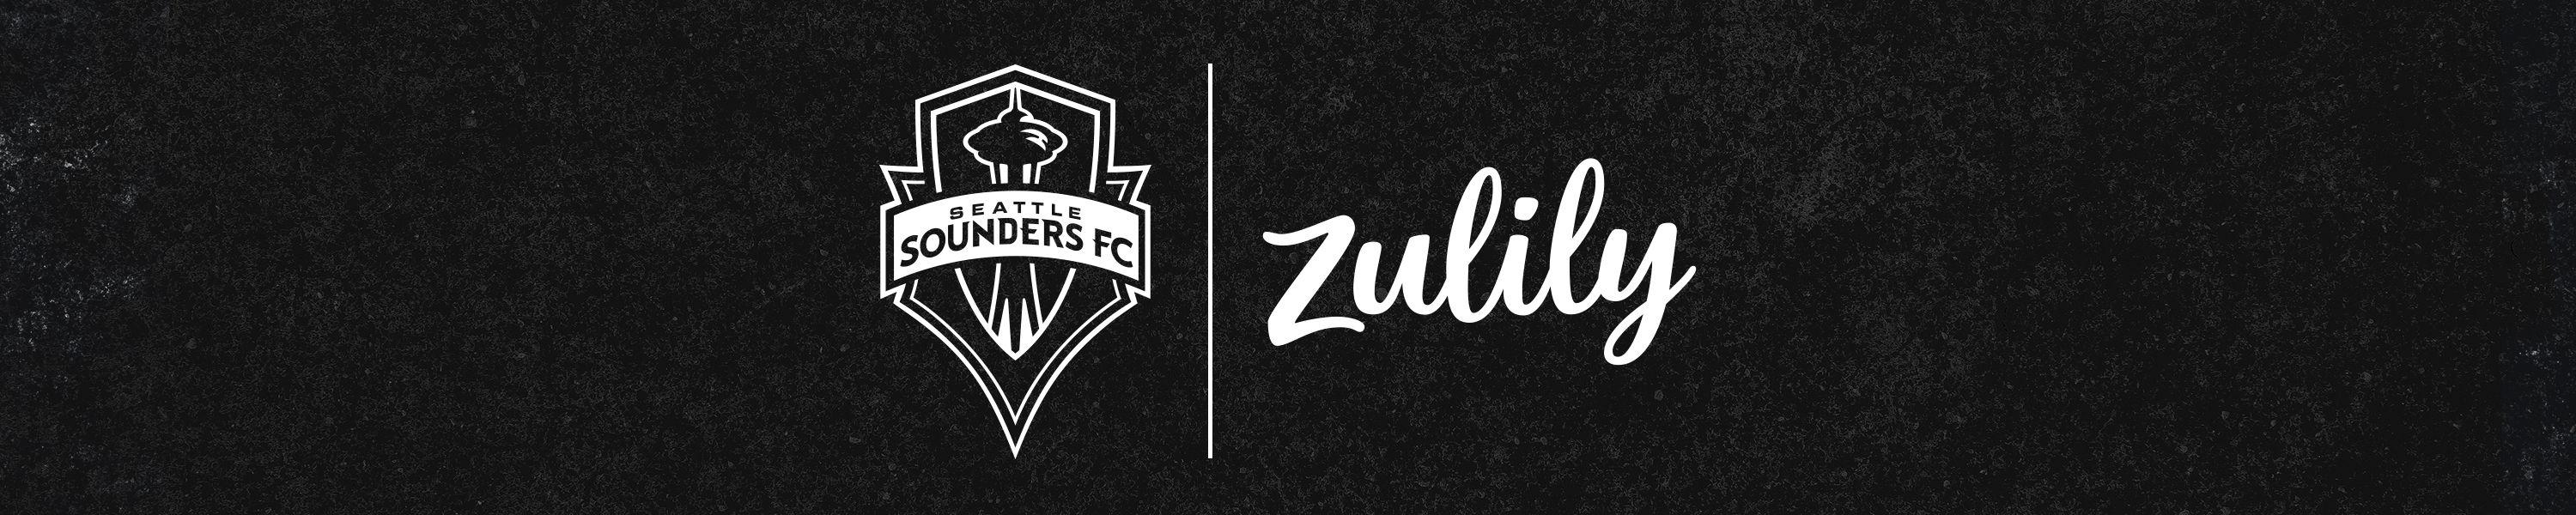 Zulily Logo - Zulily is the Official Jersey Partner of Sounders FC. Seattle